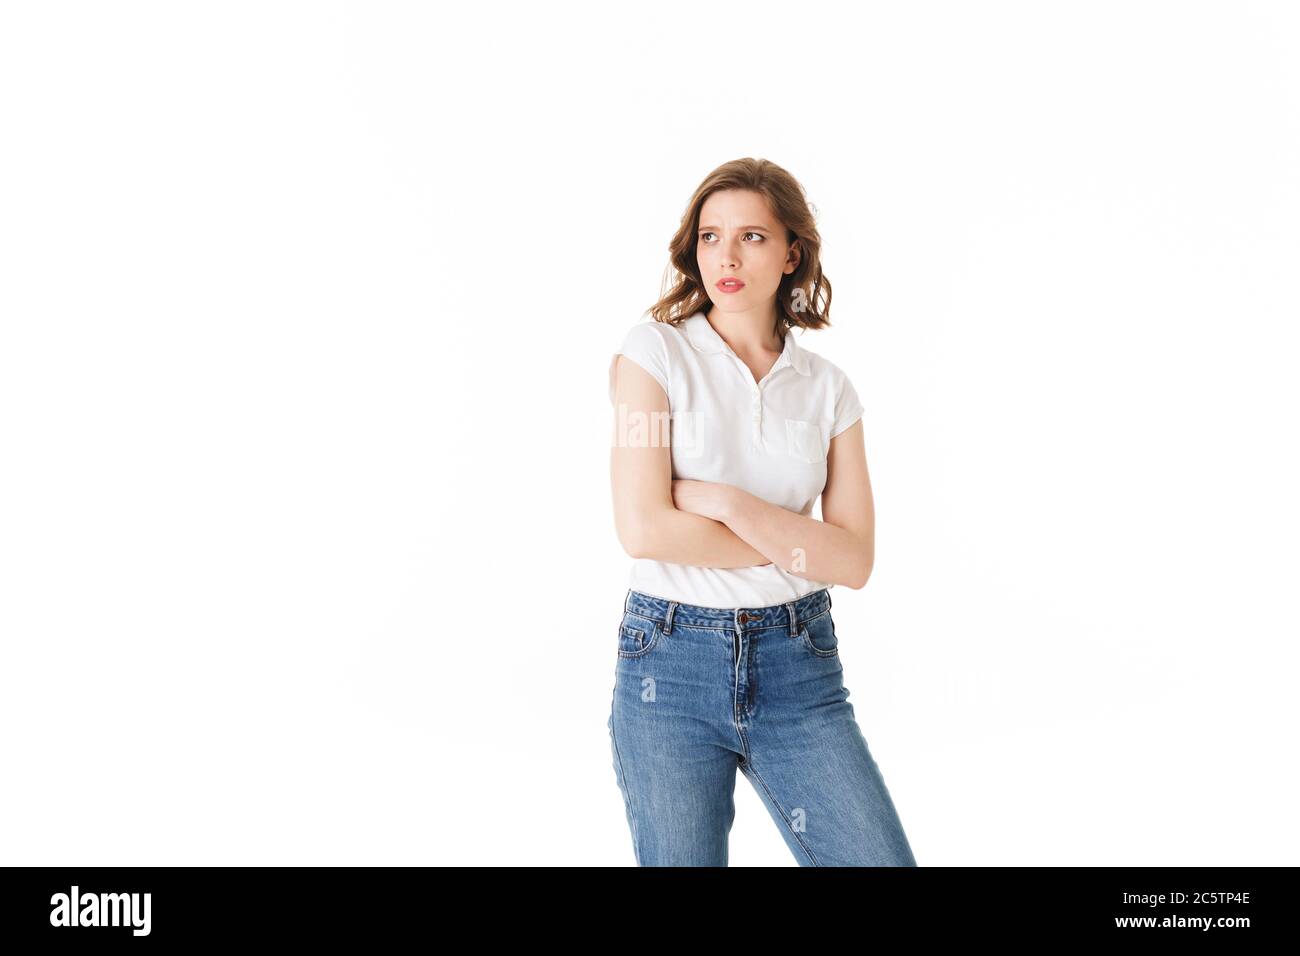 Portrait of young upset lady standing in t shirt and jeans and sadly looking aside on white background isolated Stock Photo